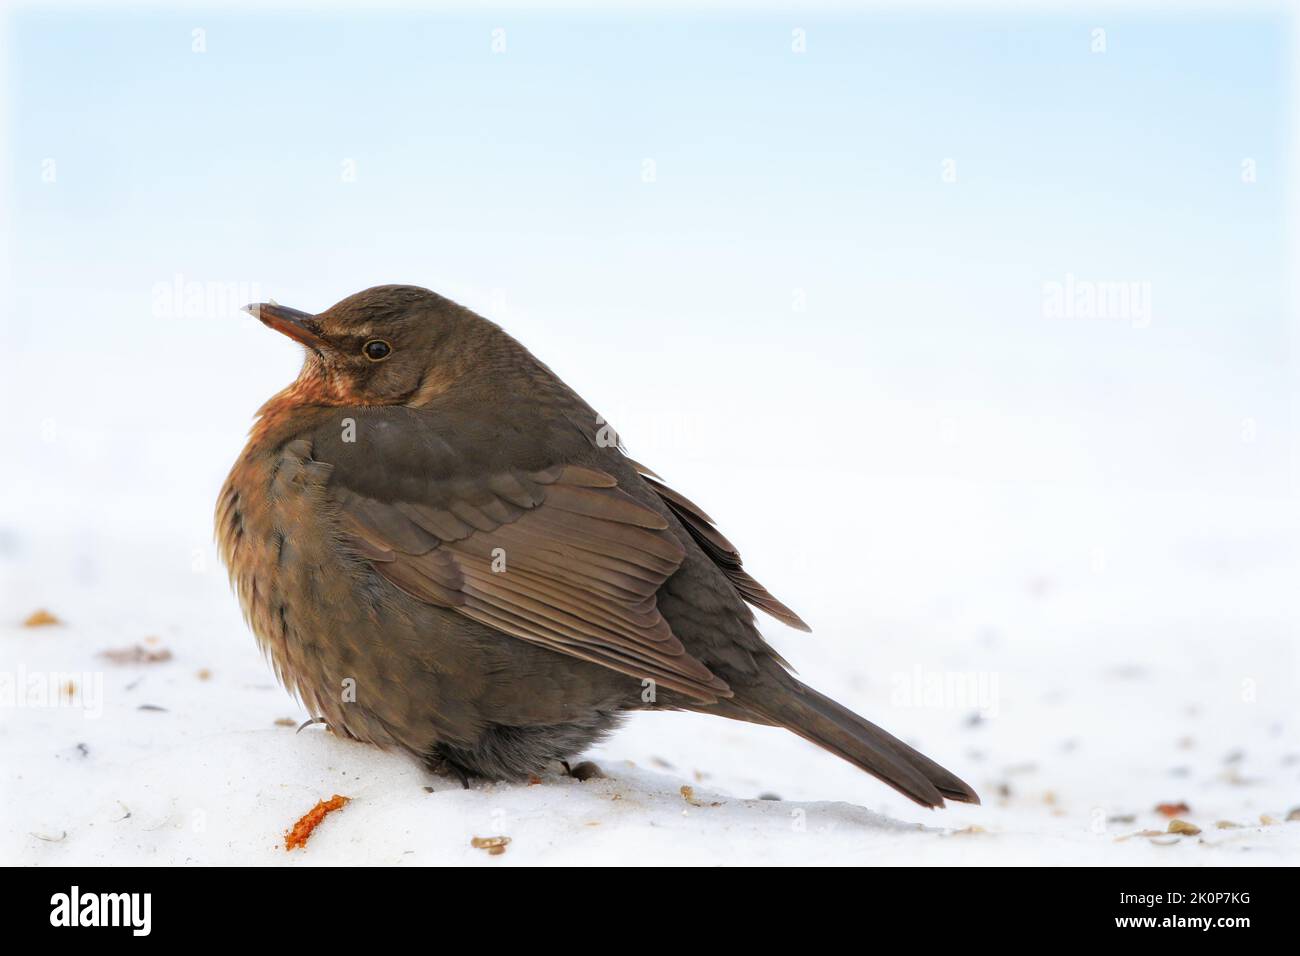 It is really cold - blackbird in snow. Blackbird eating apples in wintertime in the garden. Stock Photo